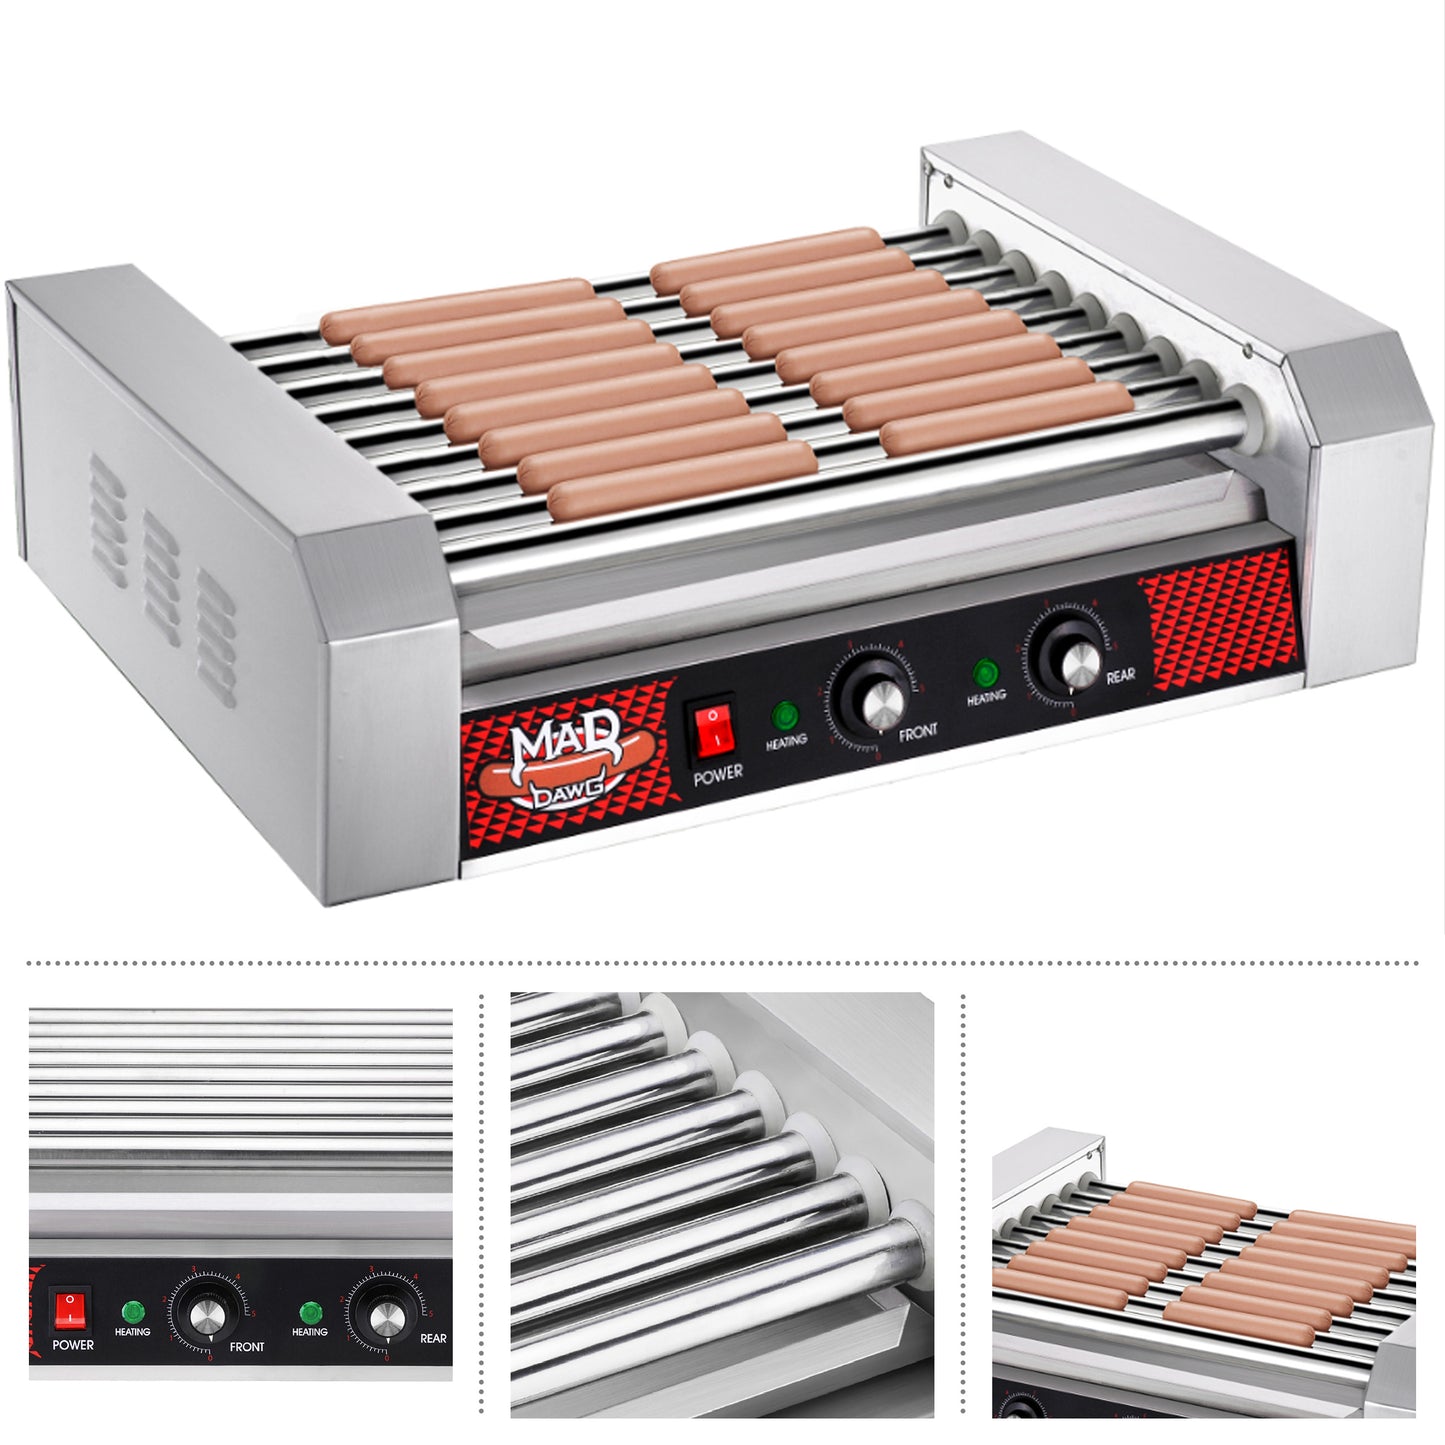 24 Hot Dog 9 Roller Grill